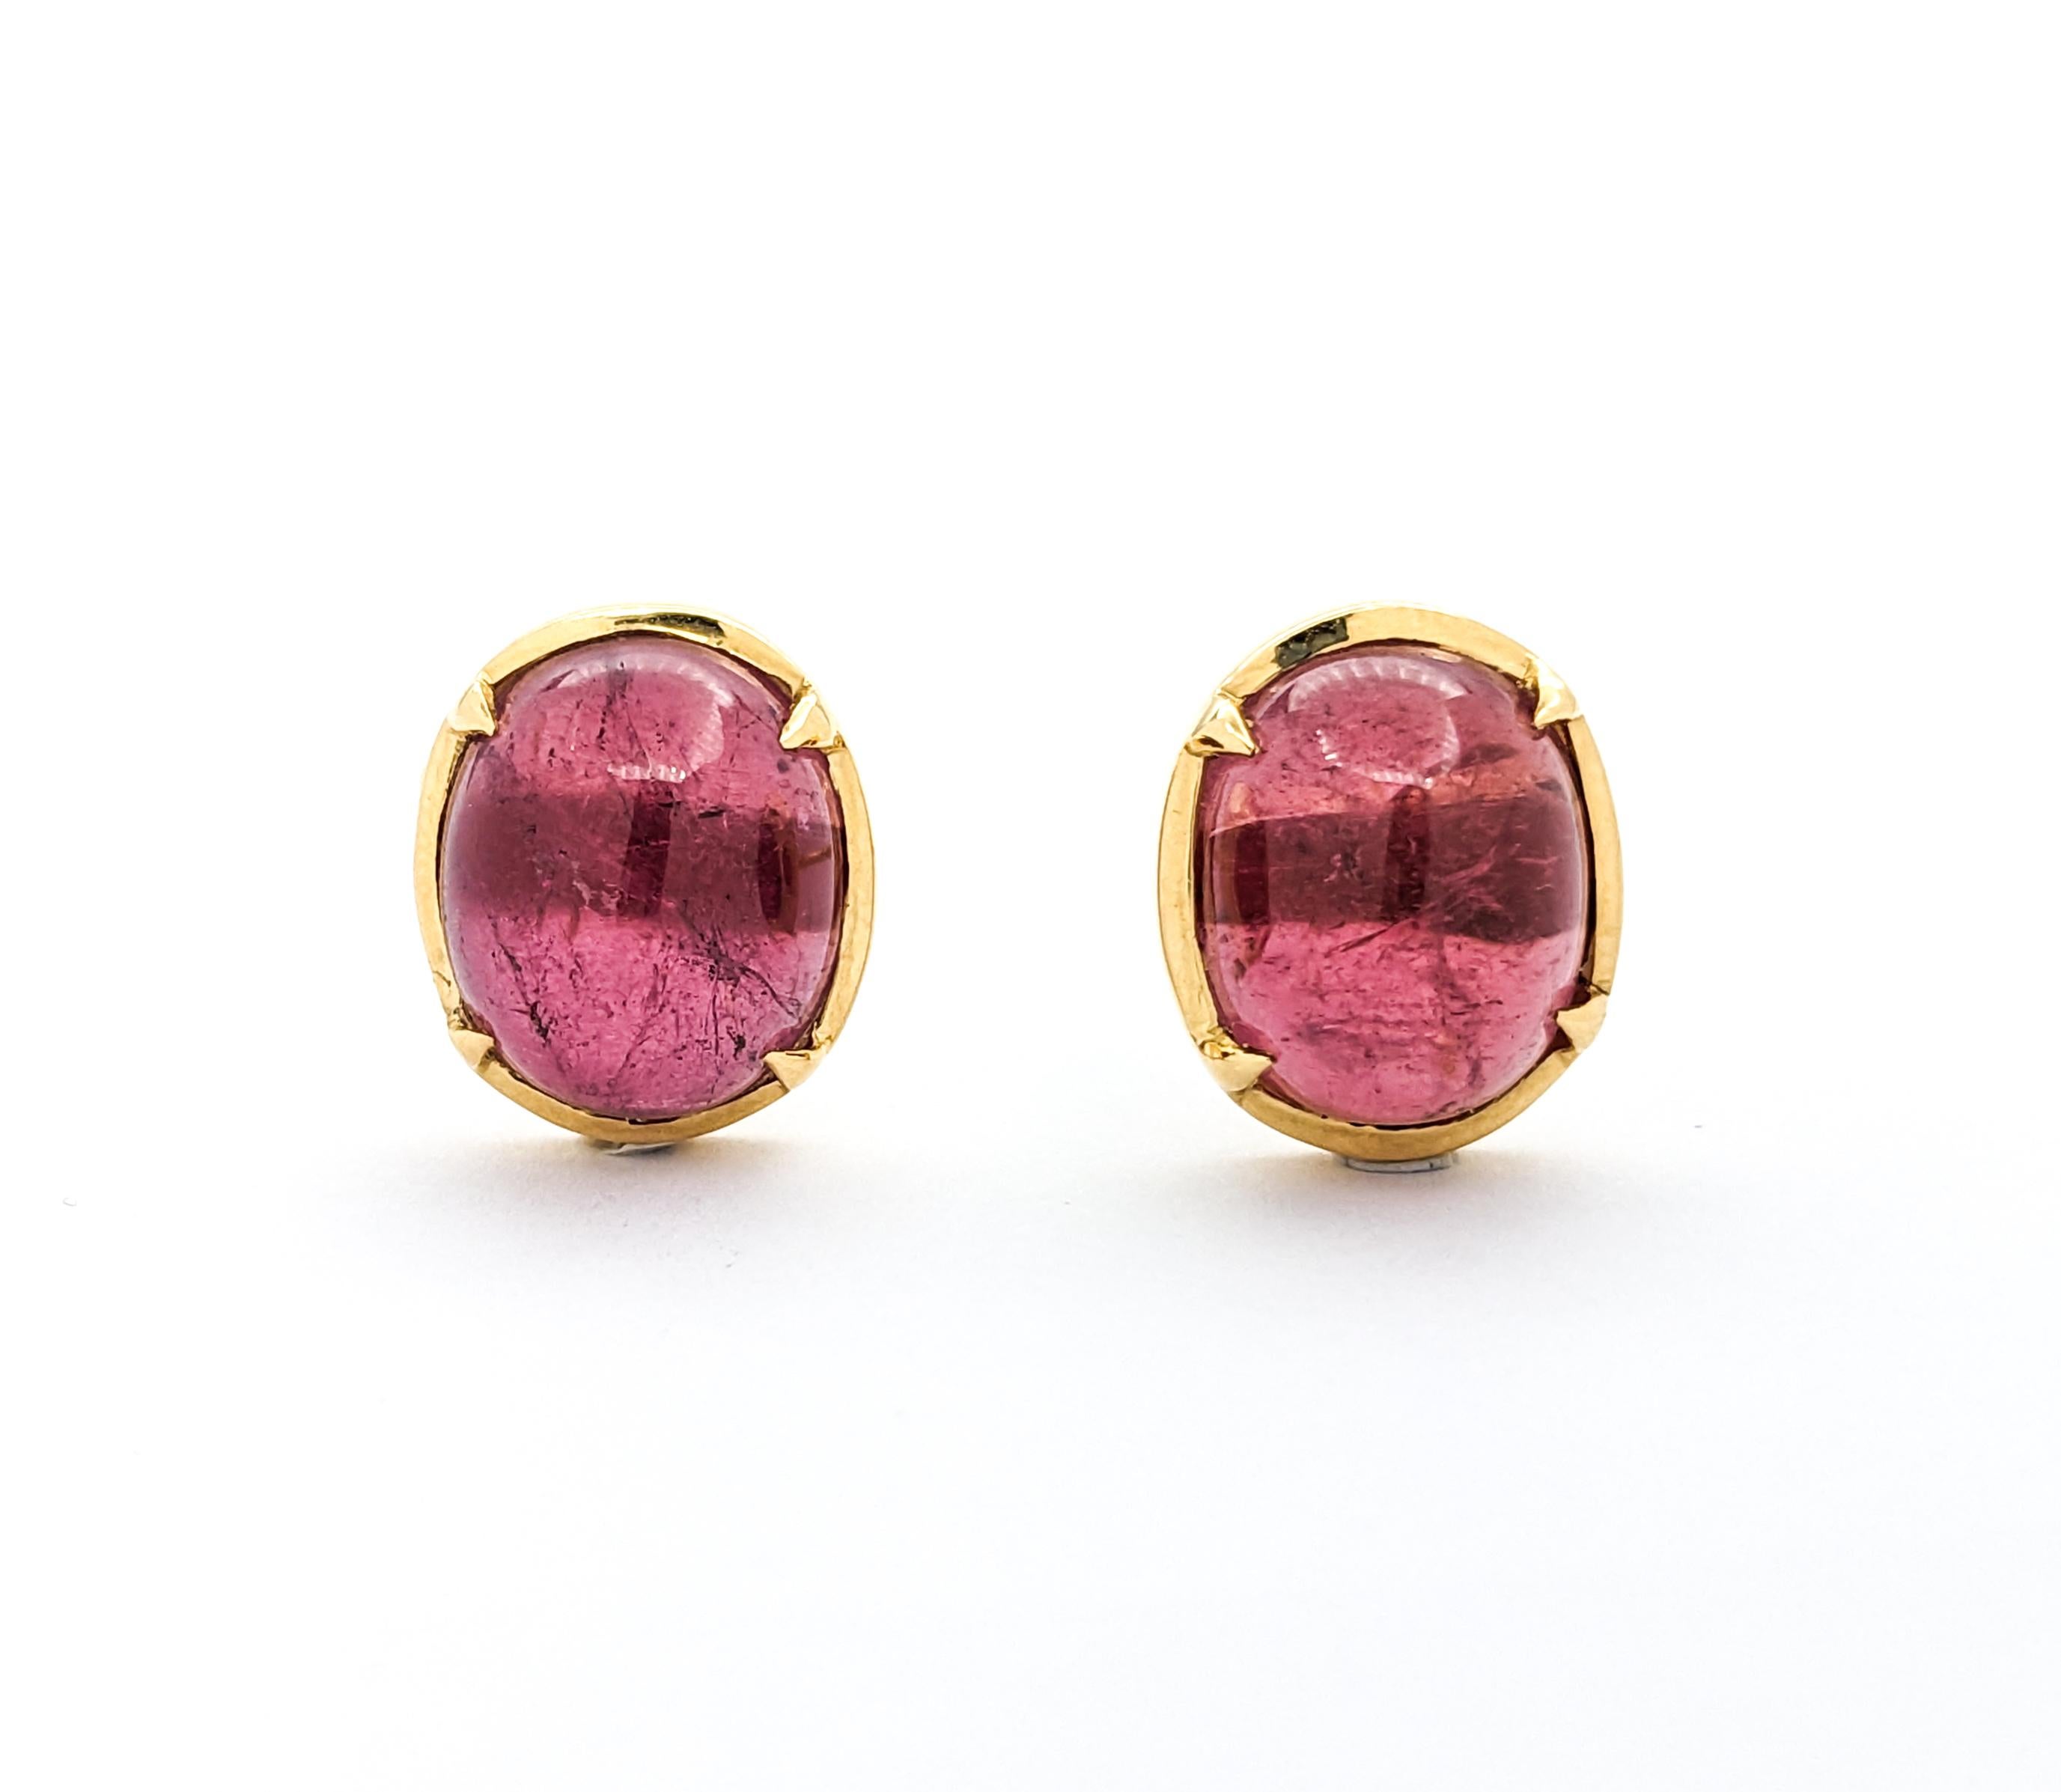 15.5ctw Cabochon Pink Tourmaline Earrings In Yellow Gold For Sale 1